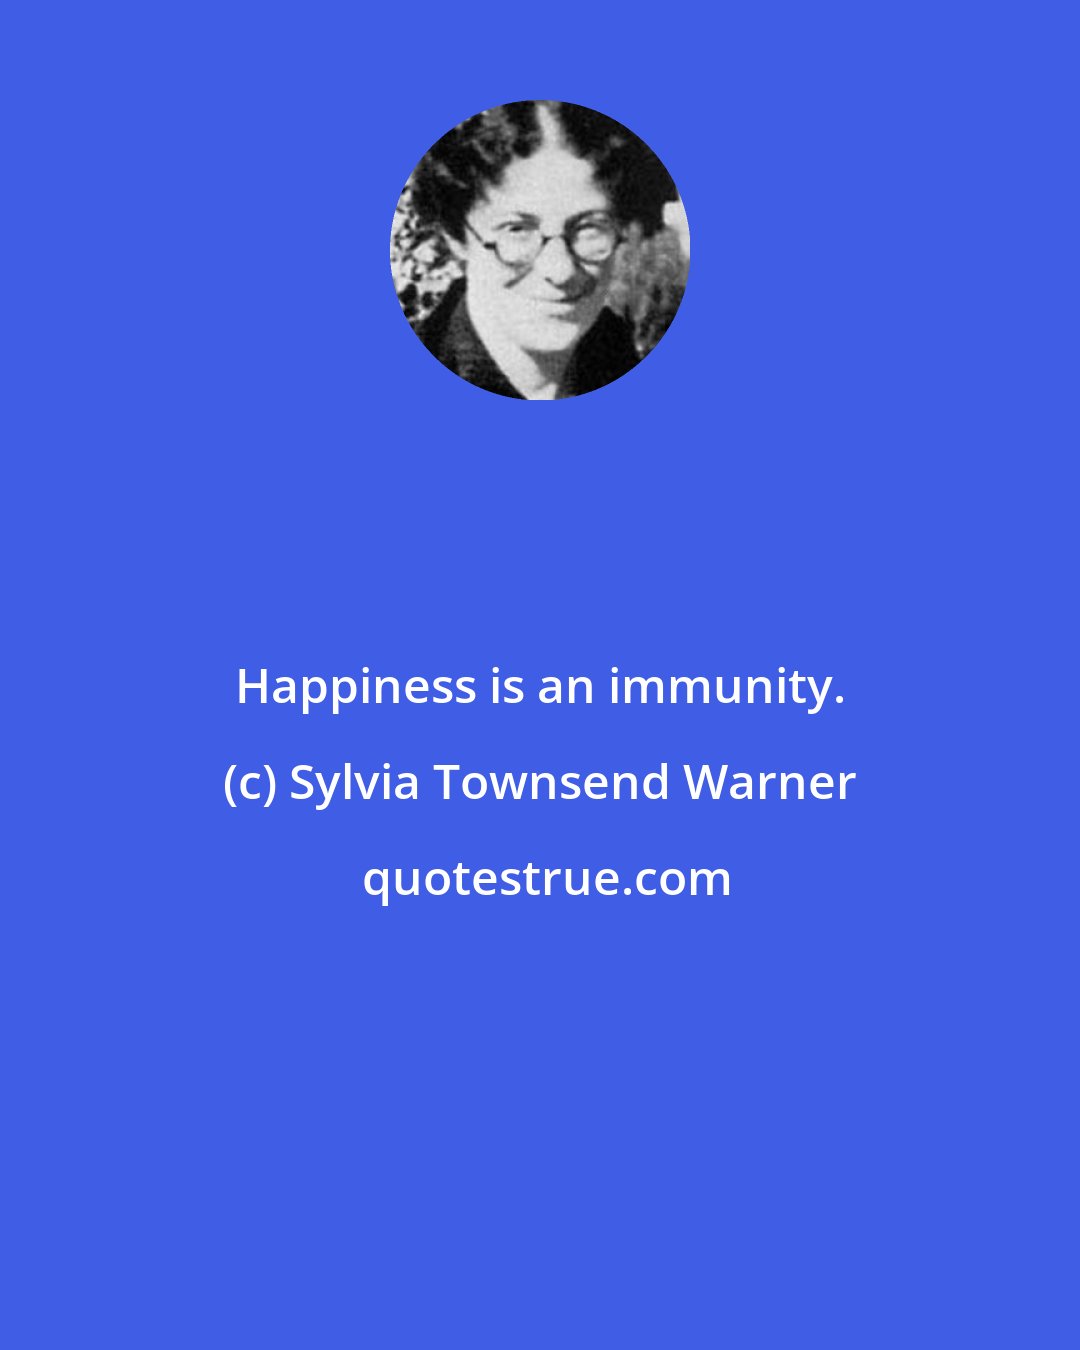 Sylvia Townsend Warner: Happiness is an immunity.